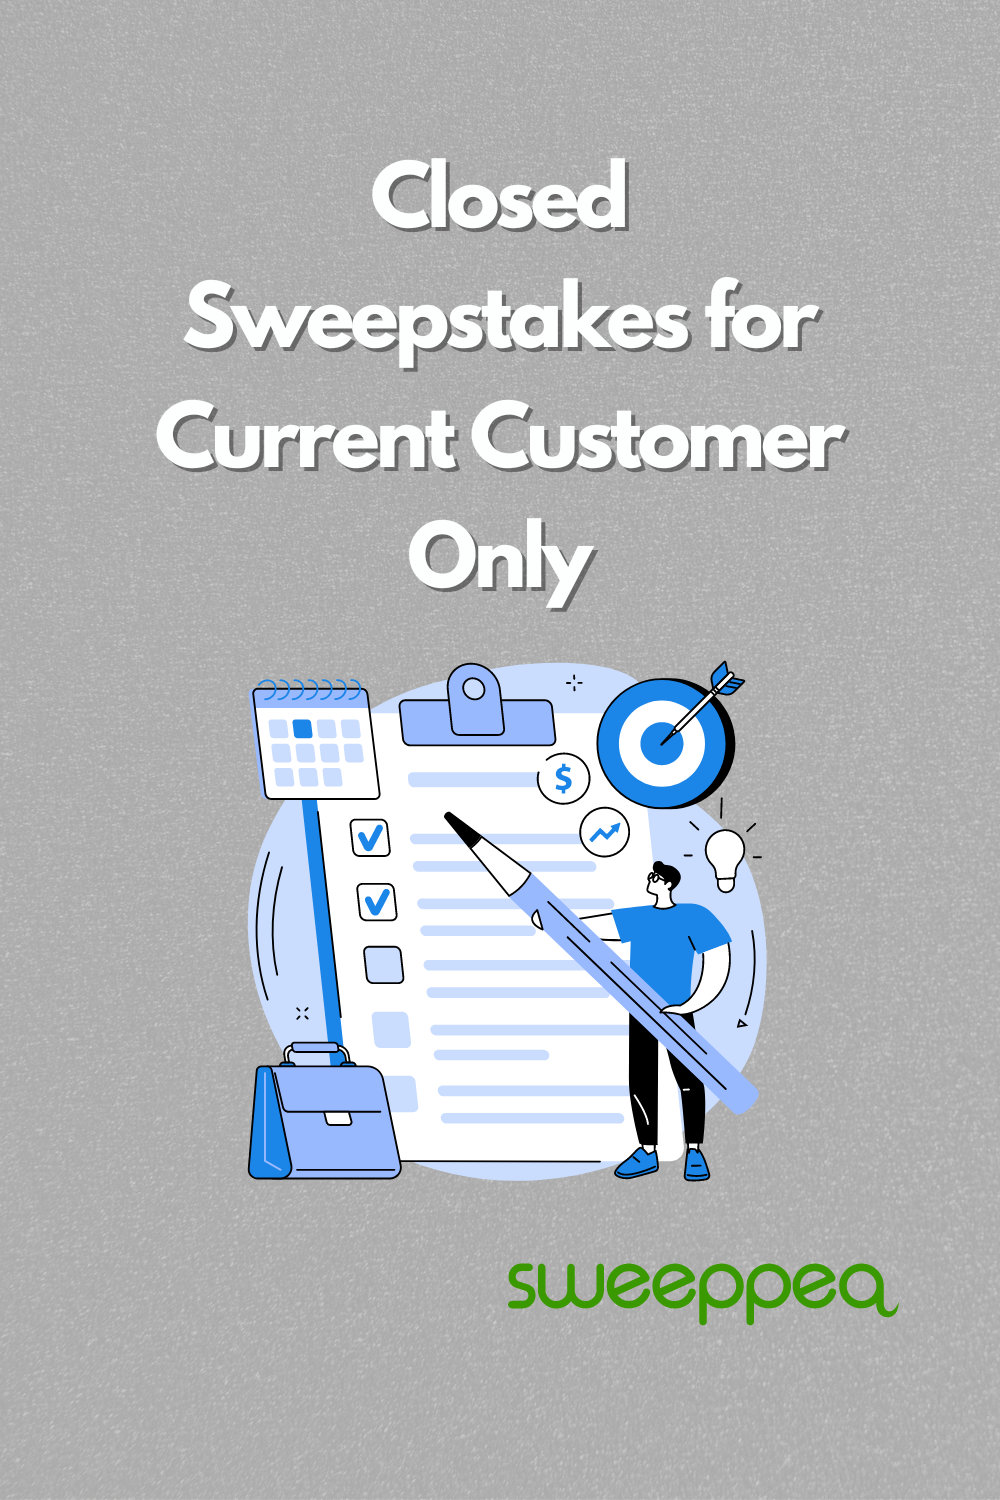 closed sweepstakes for current customers only